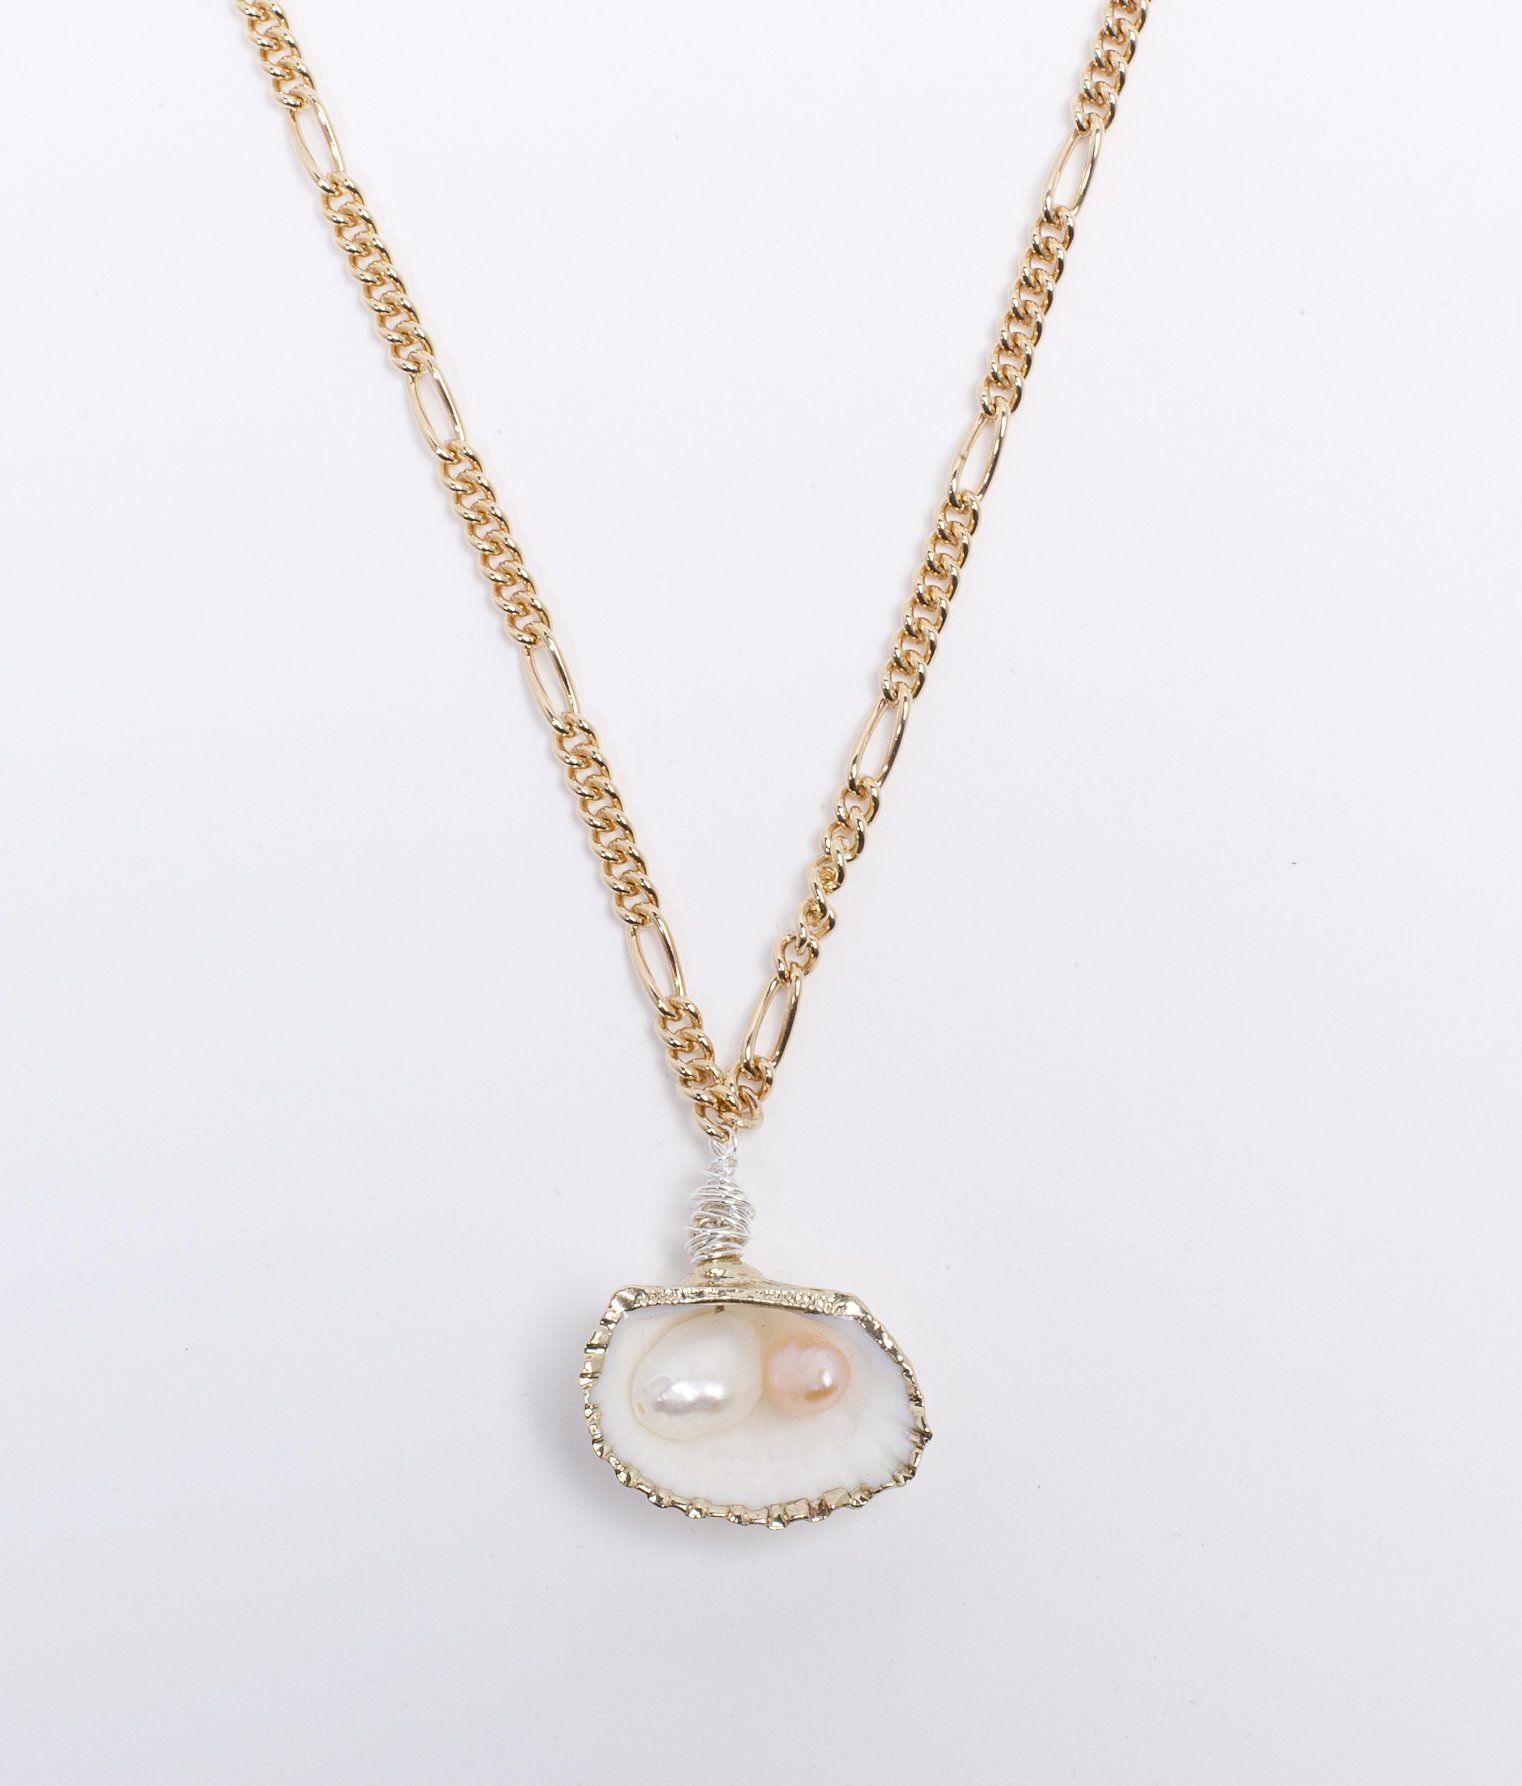 jewelry worth diving under the sea(shell) for